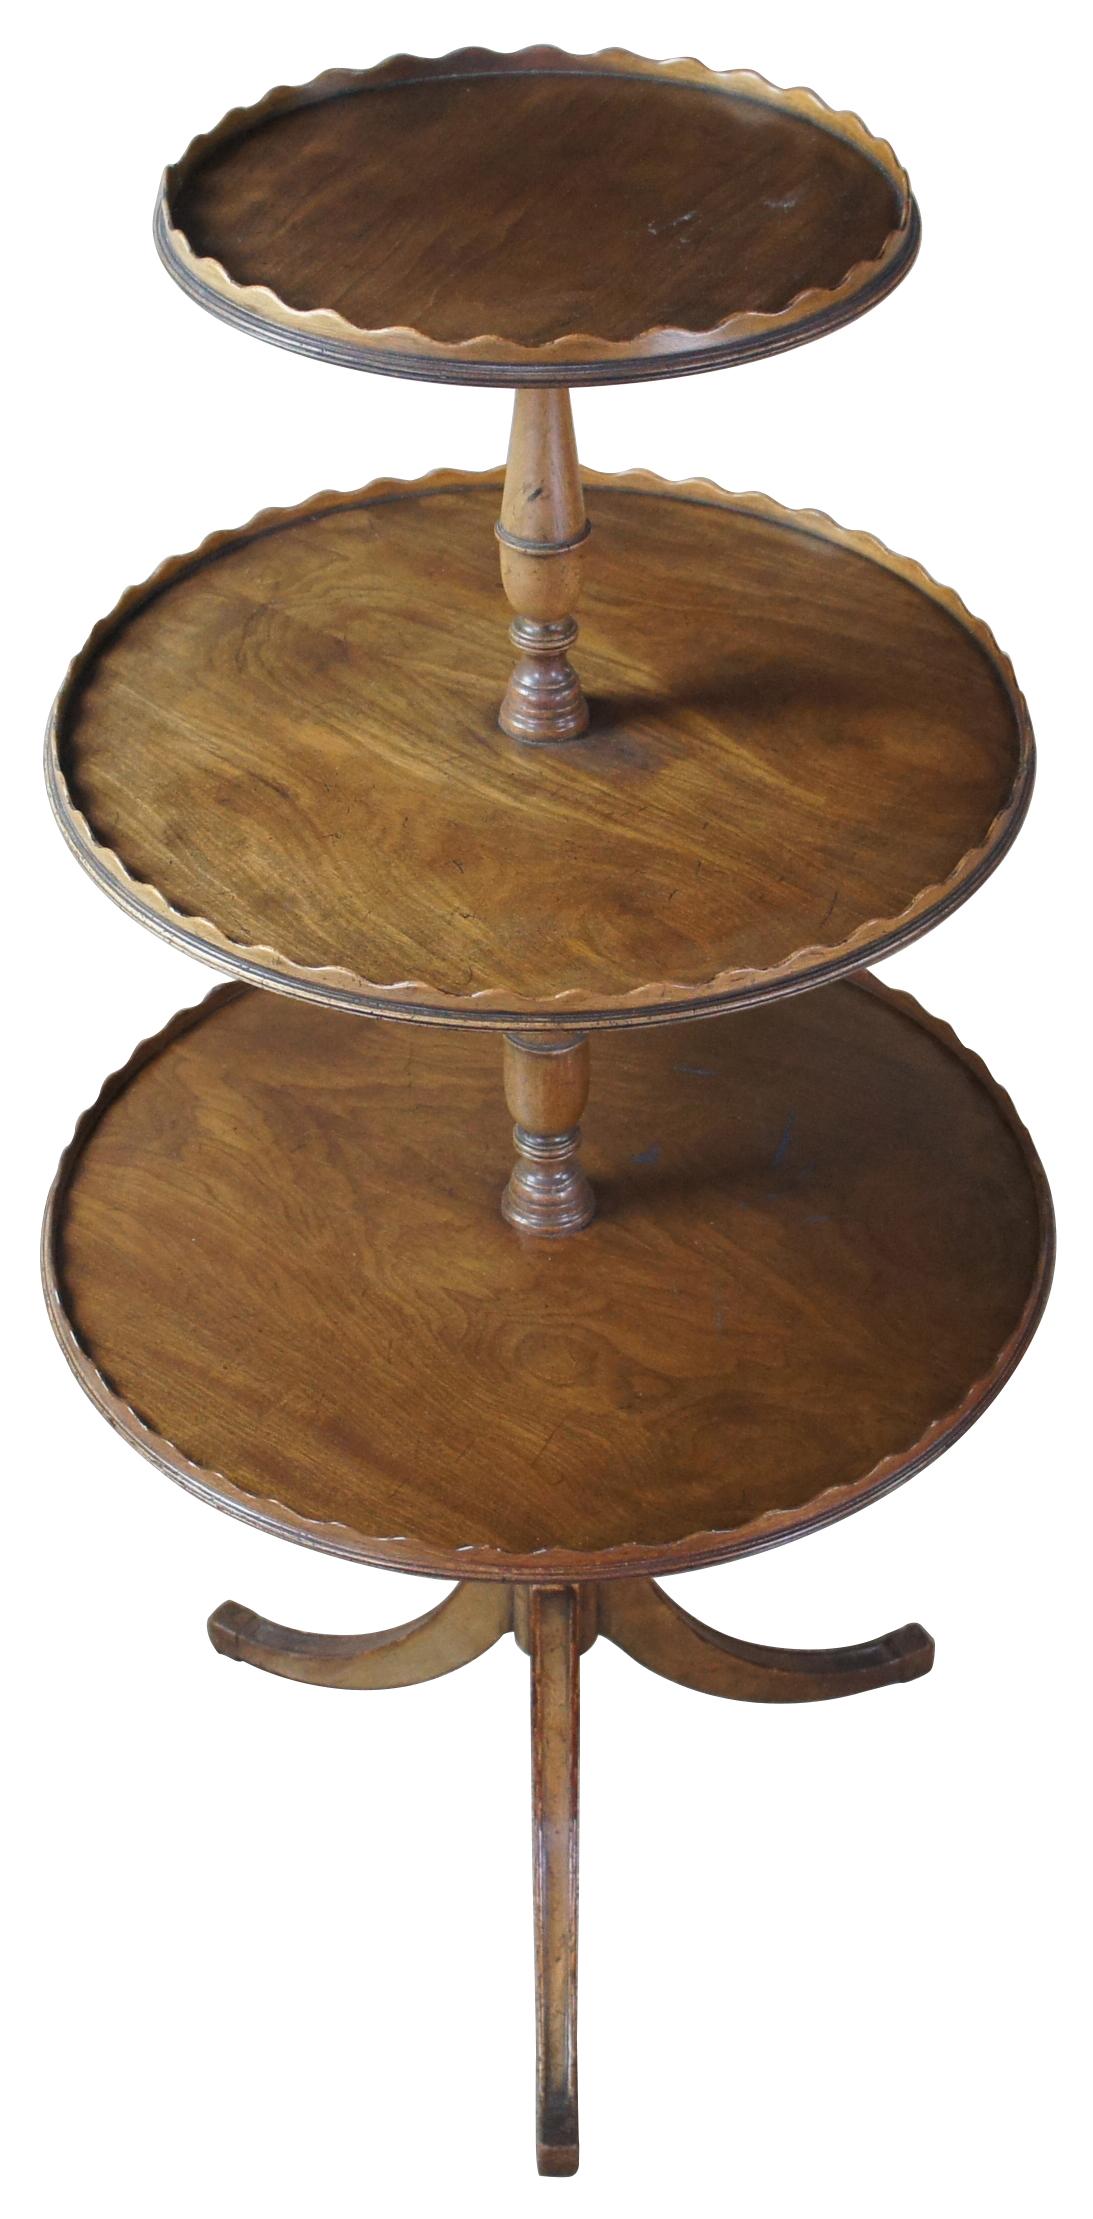 Antique Regency style dumbwaiter table. Made from mahogany with three tiers, a pedestal base with three legs, and wave crest serpentine design gallery. Measures: 46”.
  
Provenance: Estate of Carol Levitan and Jesse Philips
Mr. Philips was both a